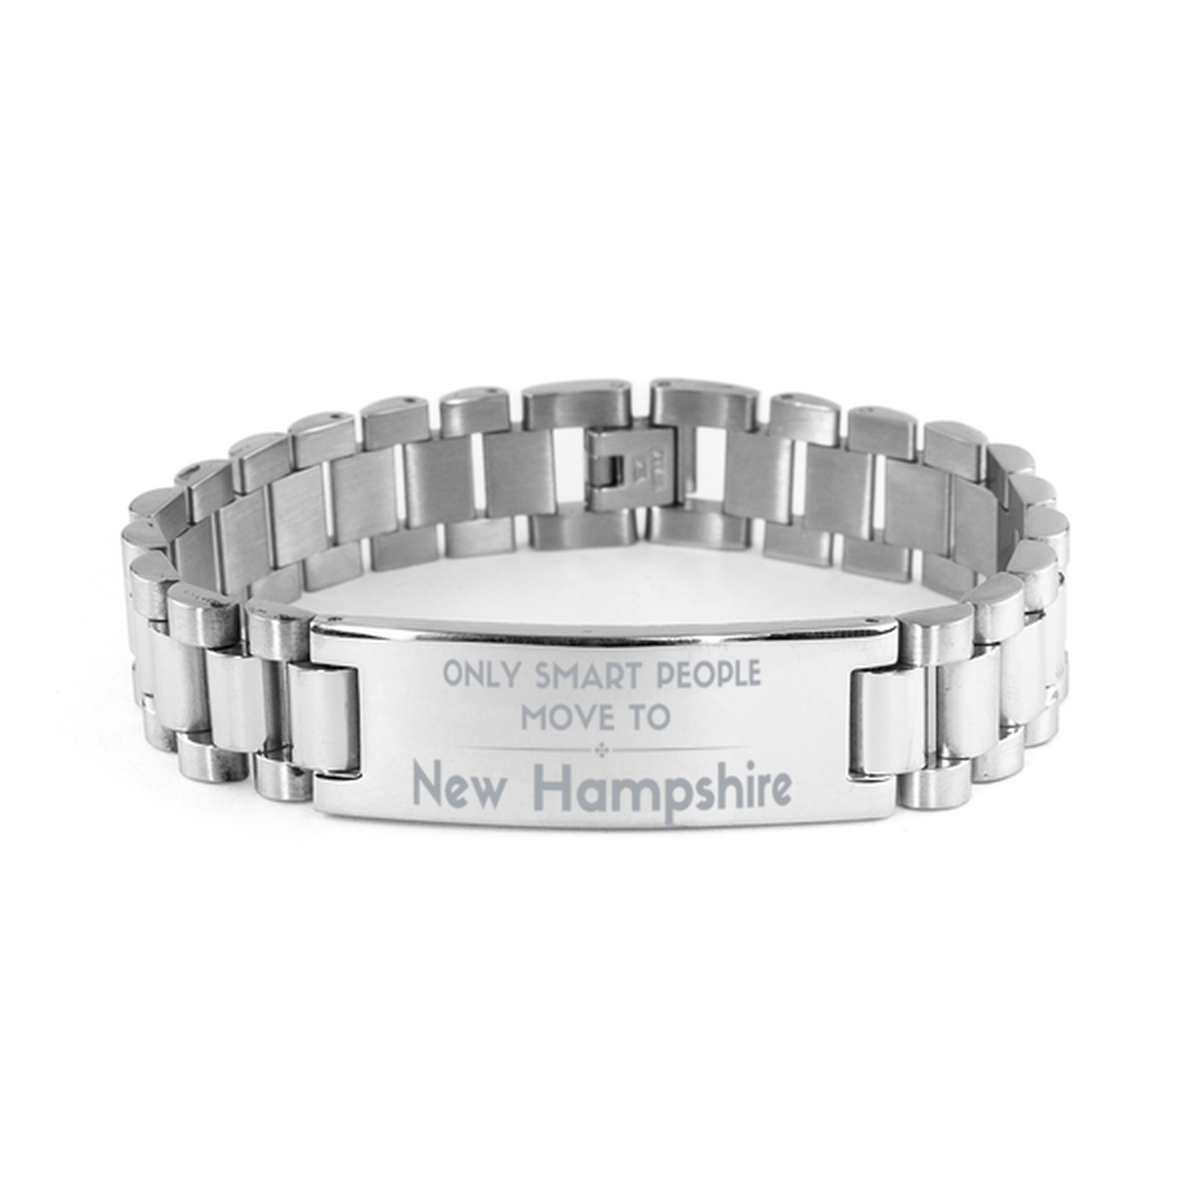 Only smart people move to New Hampshire Ladder Stainless Steel Bracelet, Gag Gifts For New Hampshire, Move to New Hampshire Gifts for Friends Coworker Funny Saying Quote